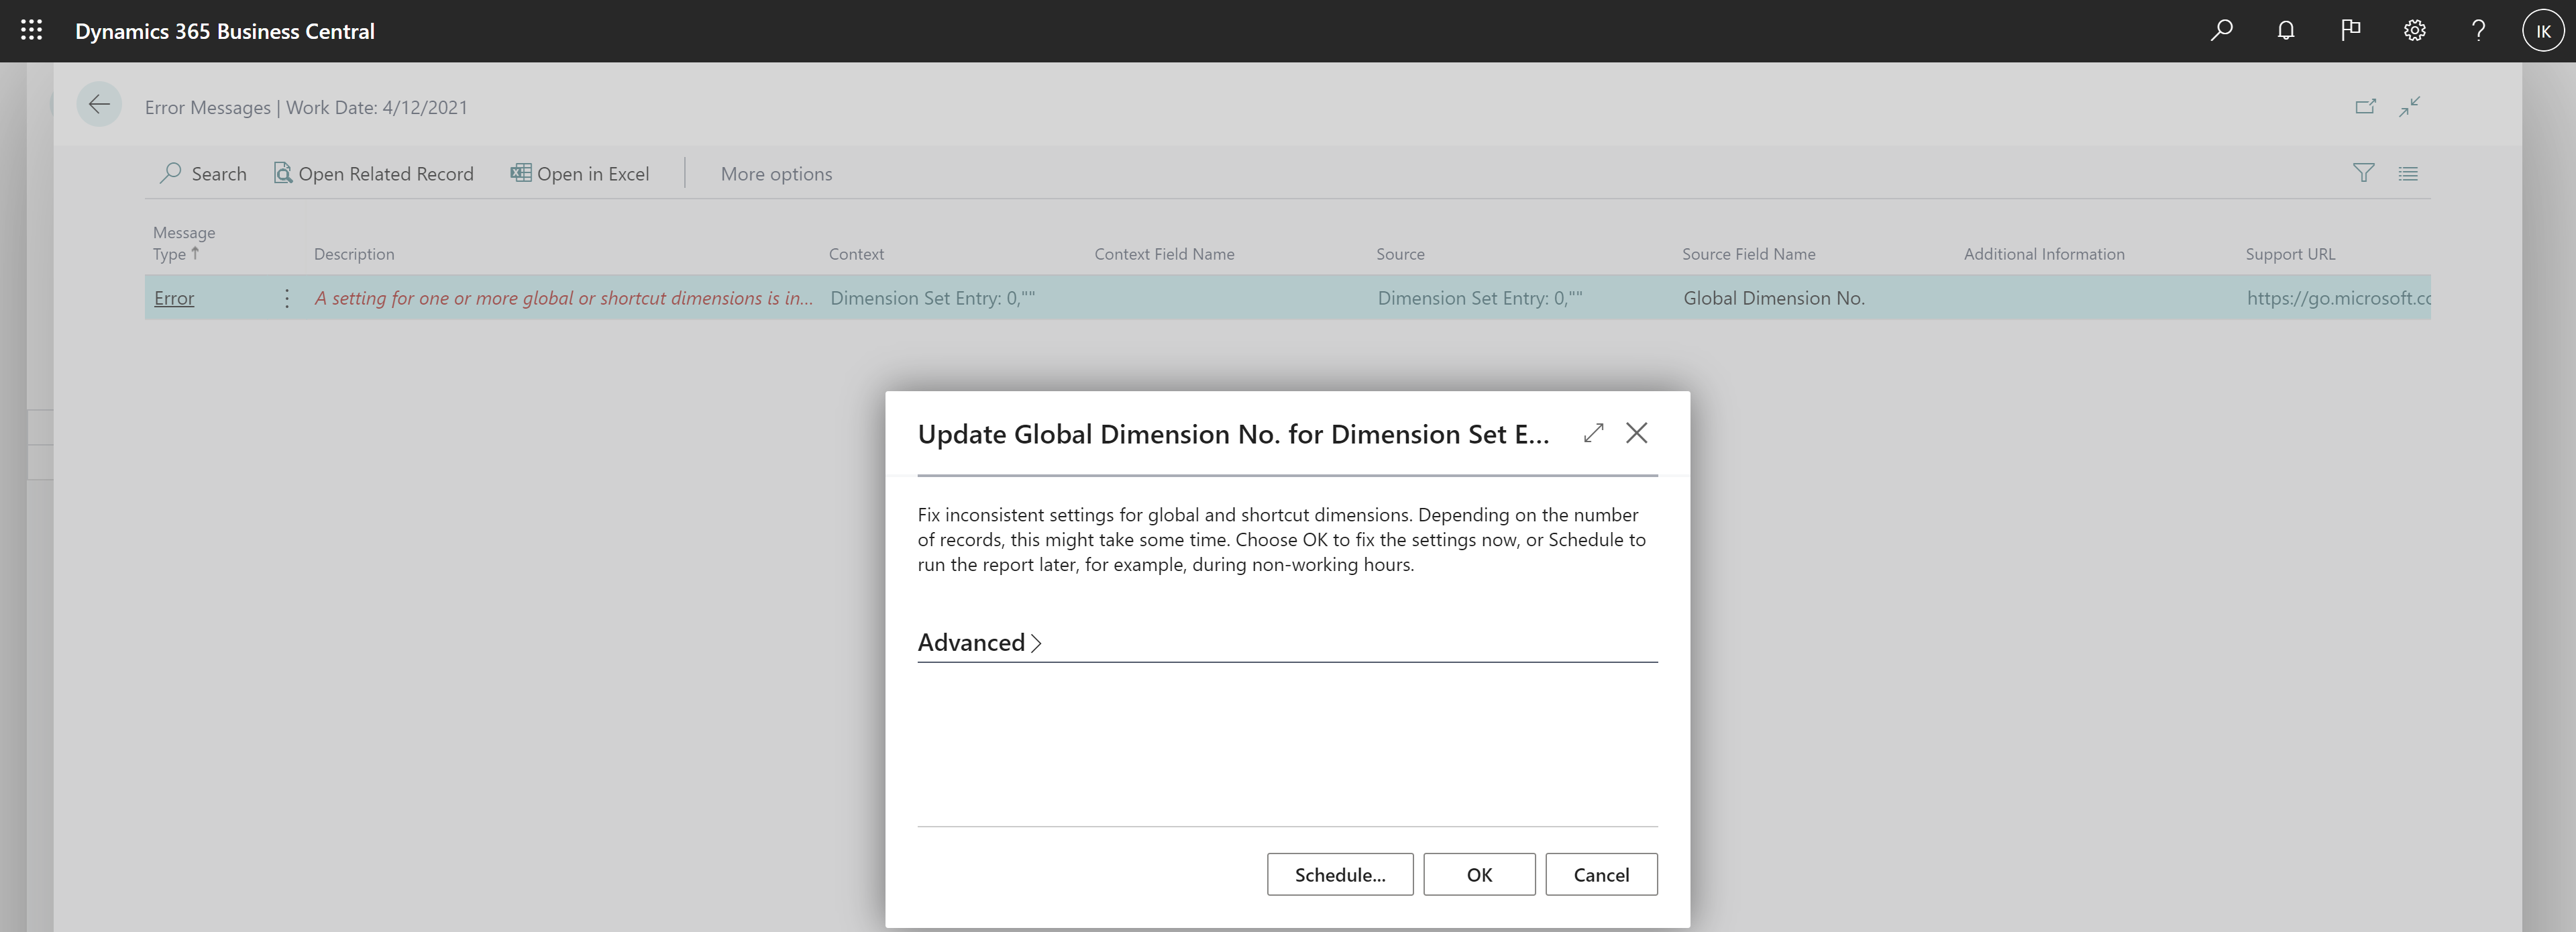 Shows new Update Global Dimension No. for Dimension Set Entries report